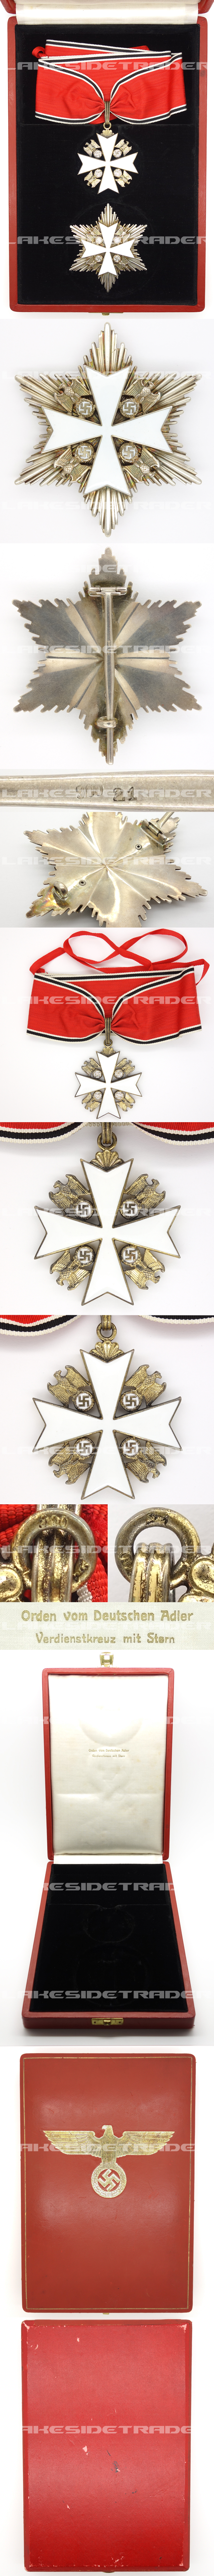 Order of the German Eagle Neck Cross and Star by 21